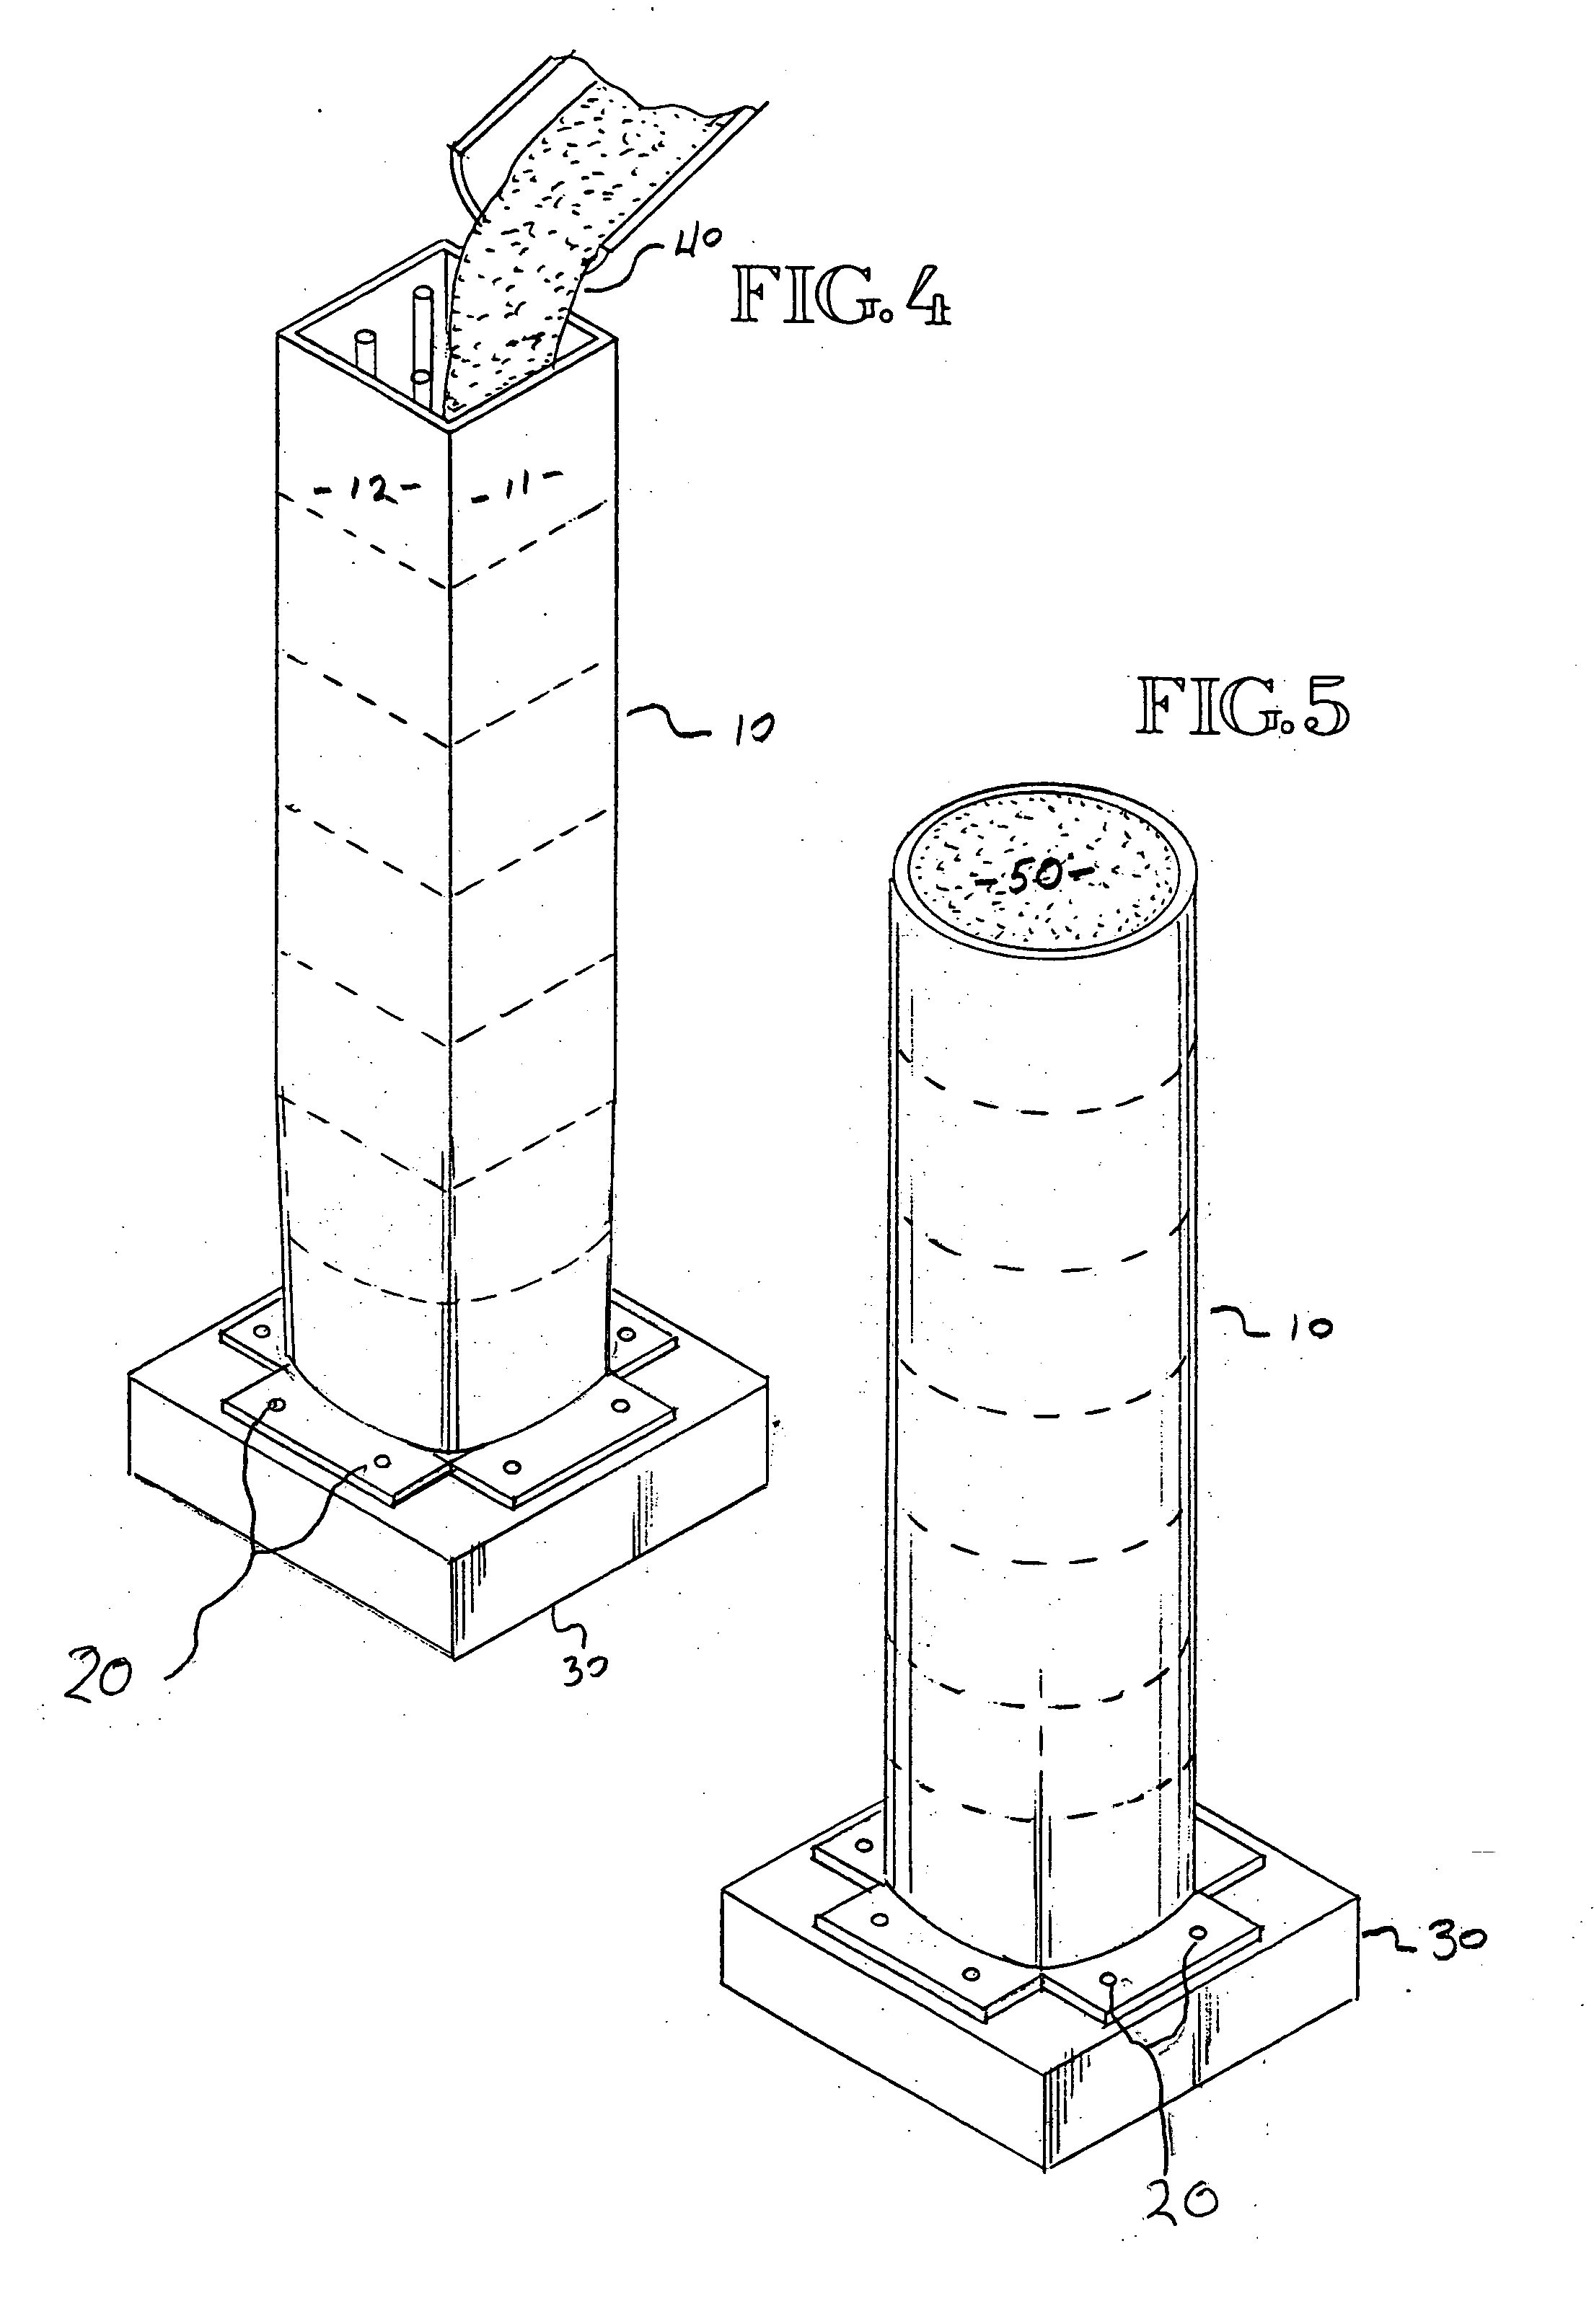 Forming apparatus and method for constructing concrete columns